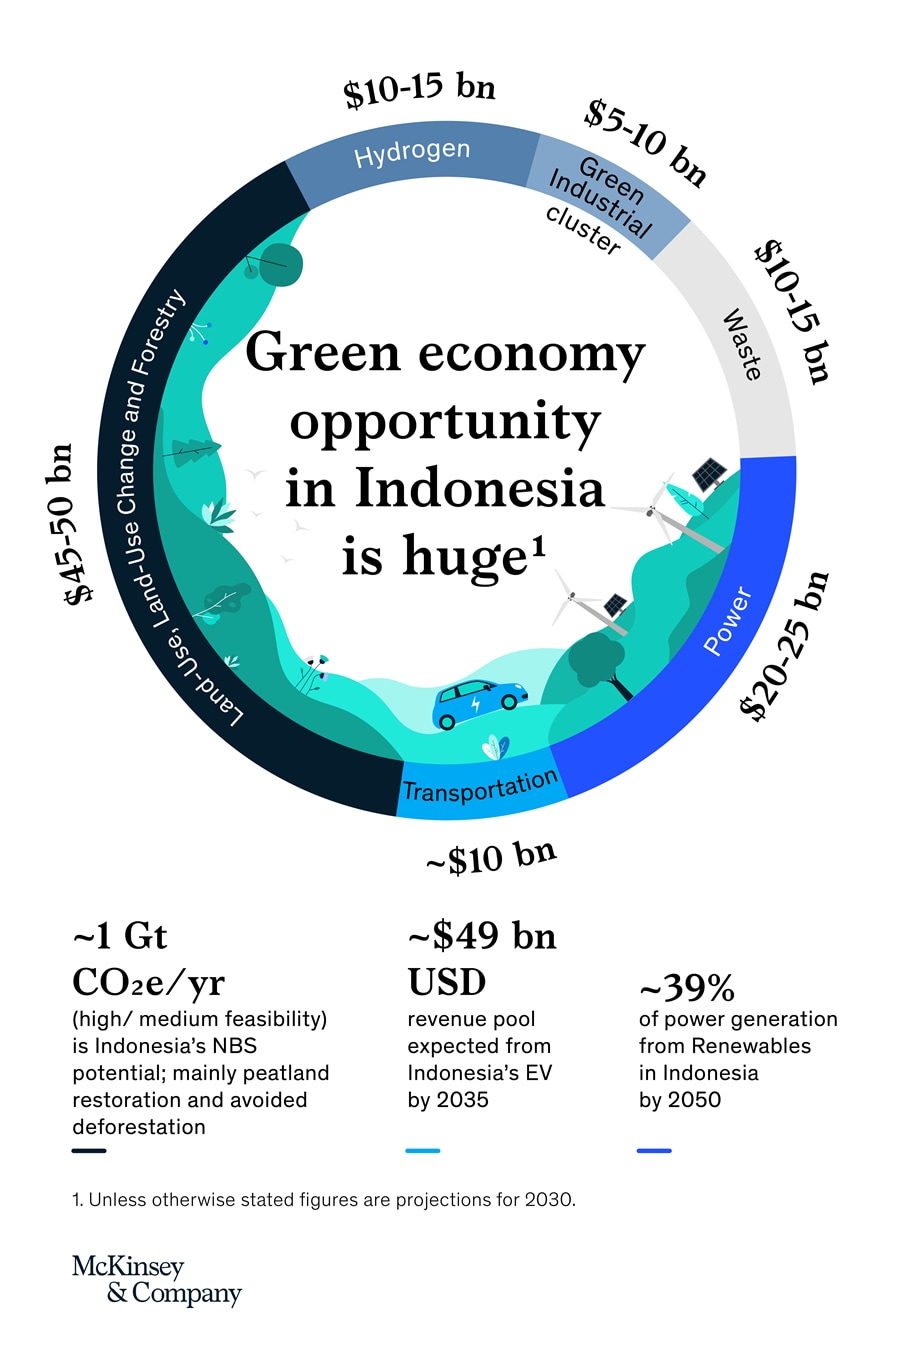 Capturing the Green Business Opportunity in Indonesia